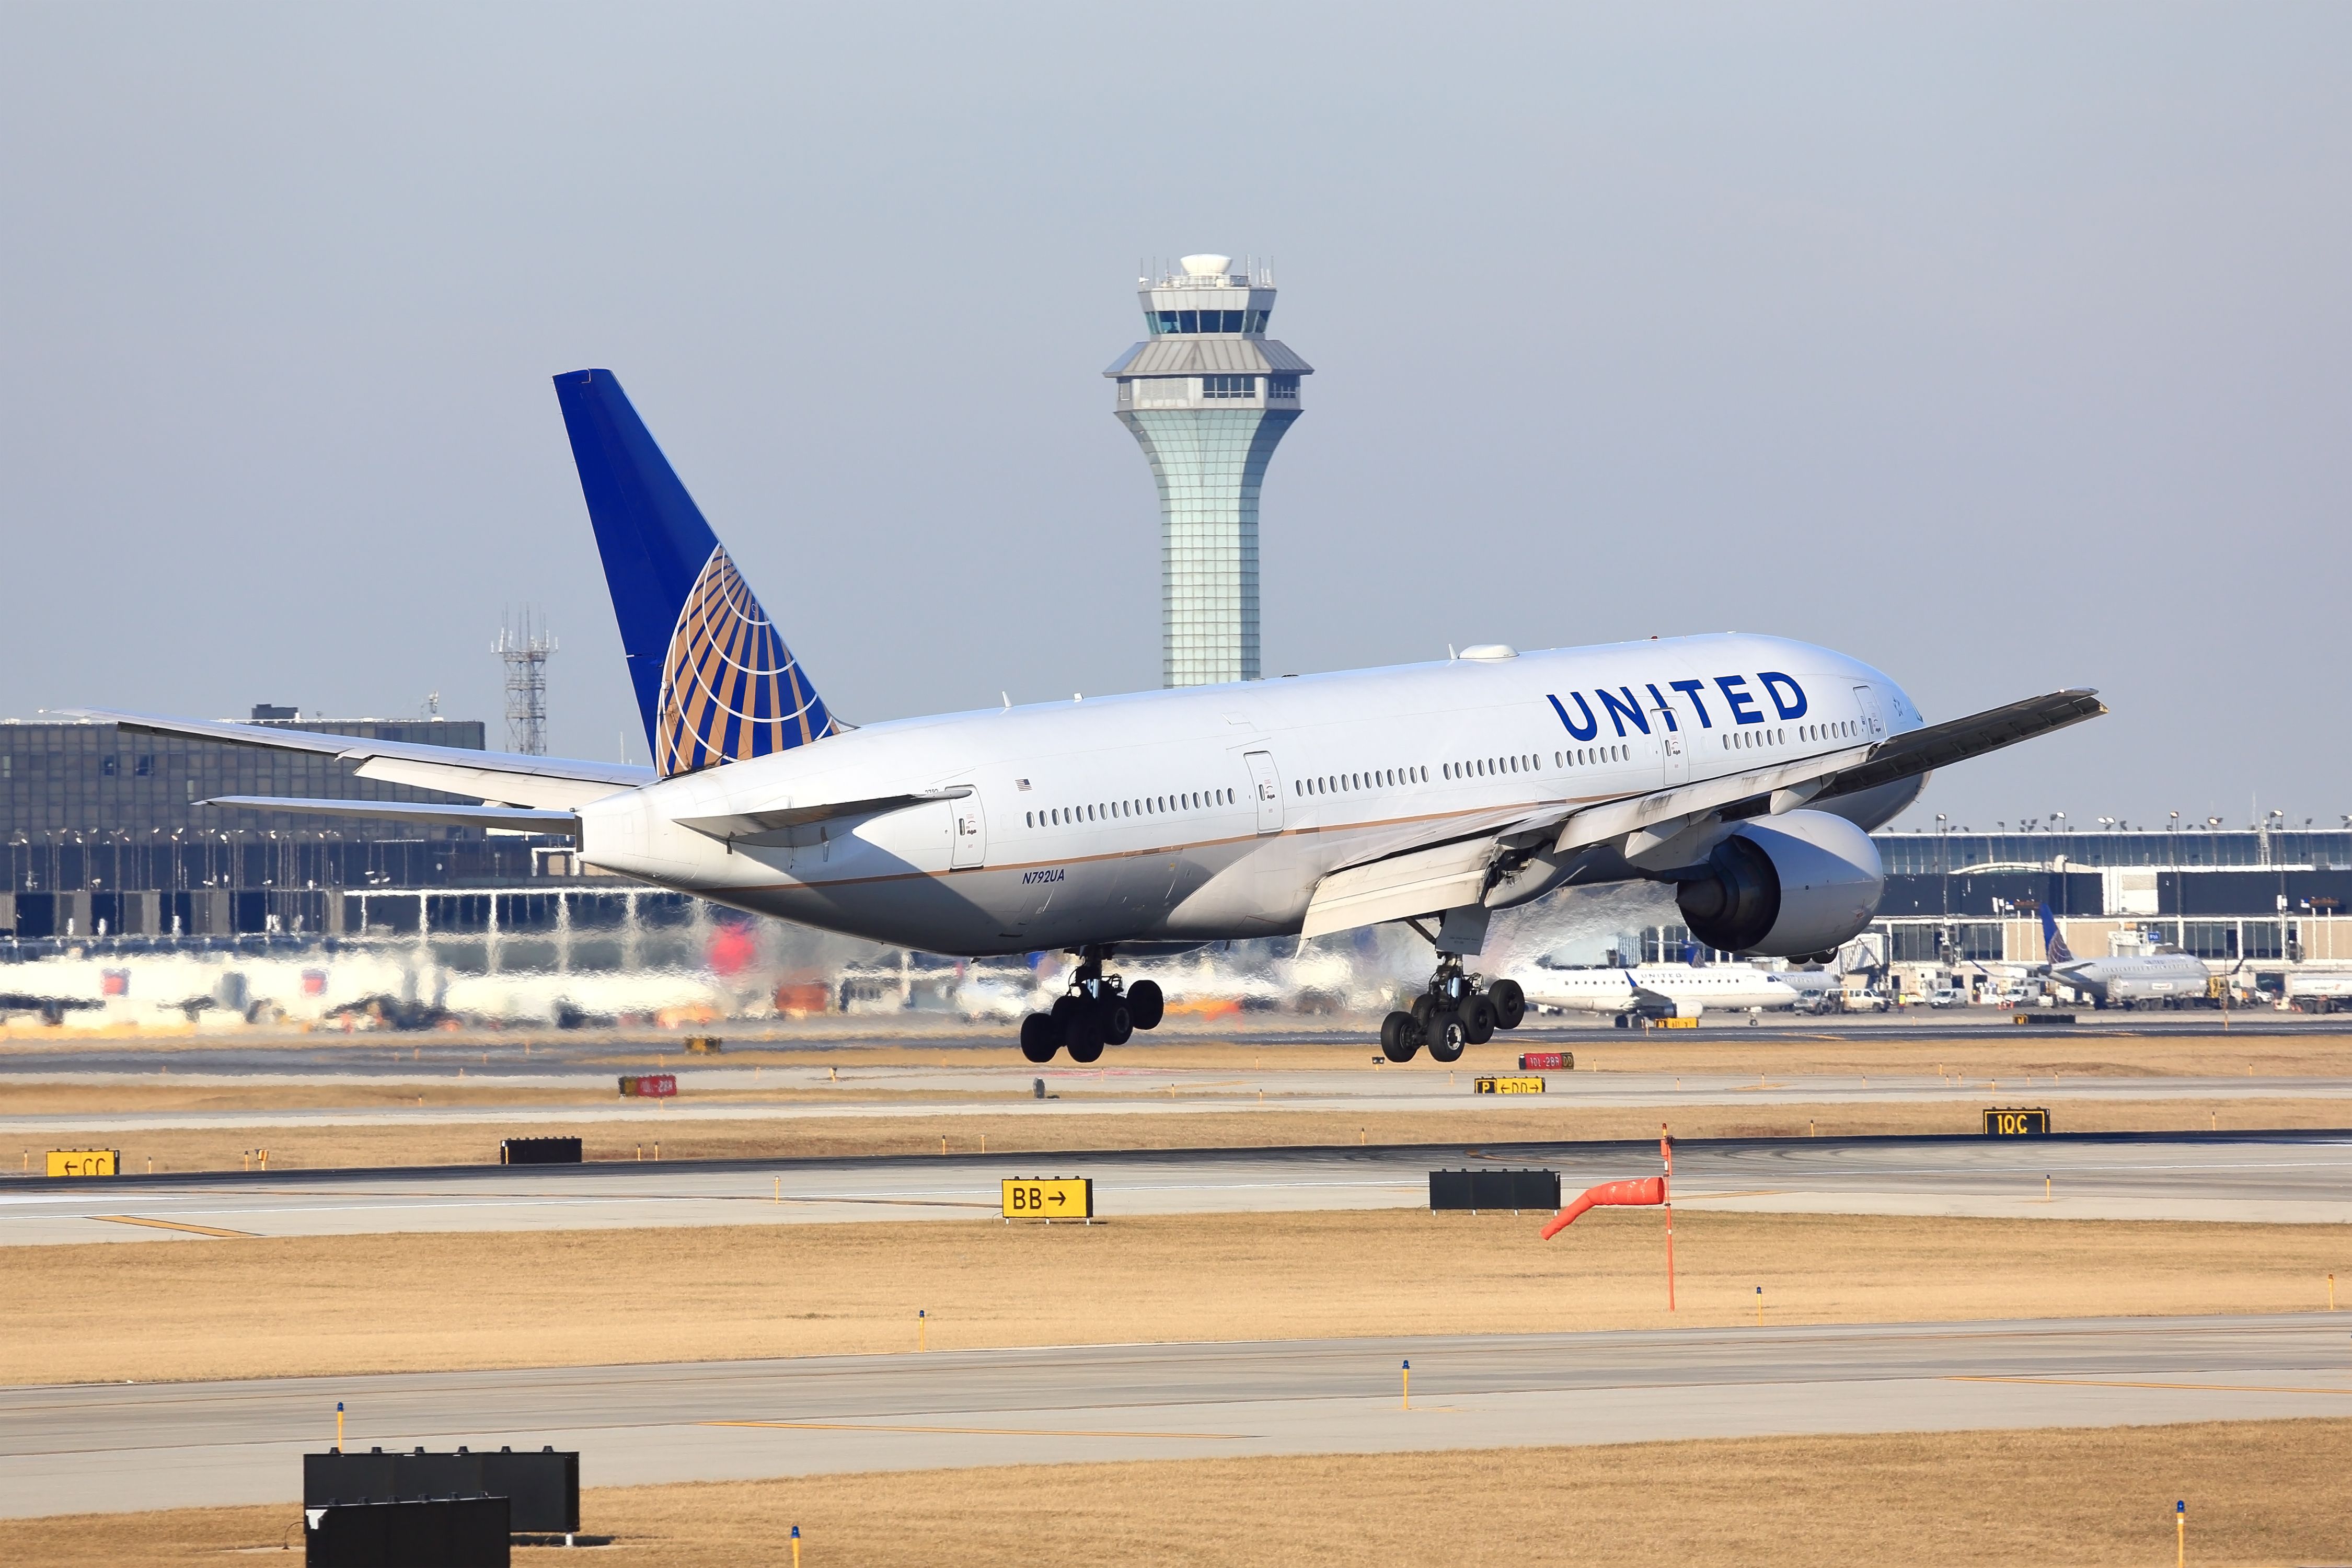 United Airlines B777 at ORD